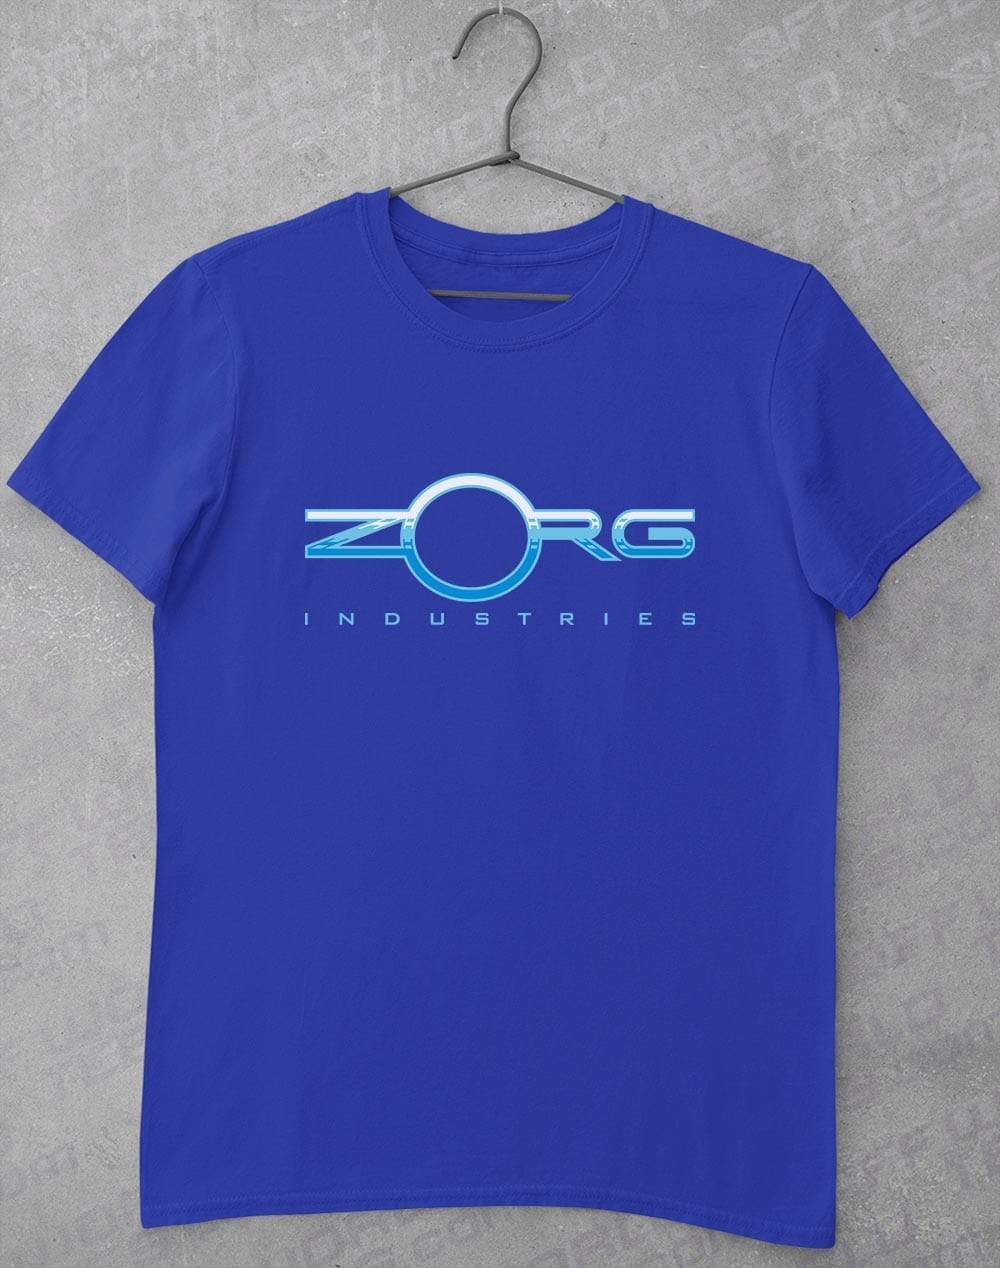 Zorg Industries T-Shirt S / Royal  - Off World Tees